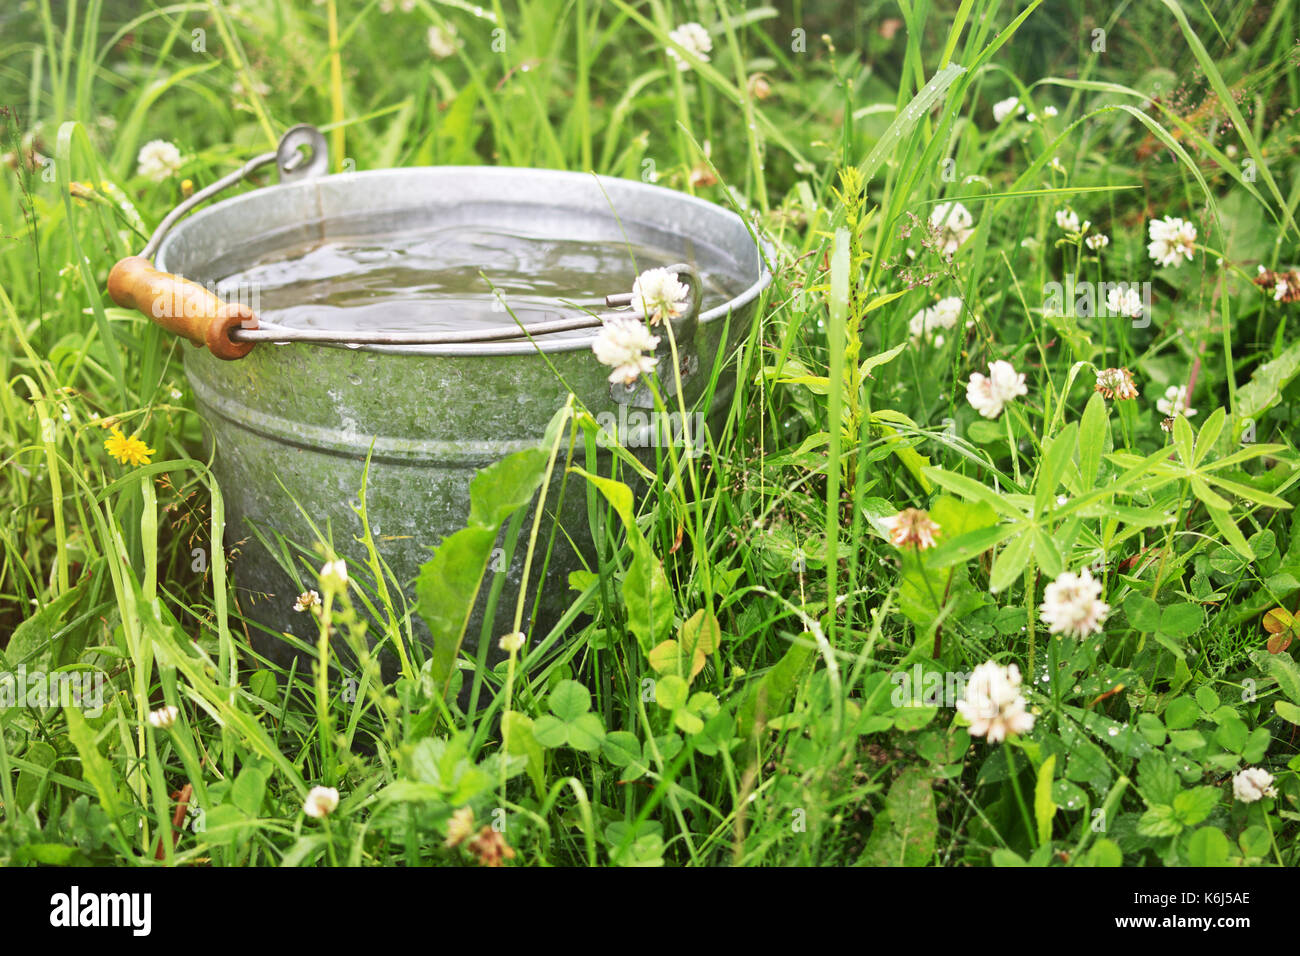 It is raining. Bucket with rain water in the grass Stock Photo